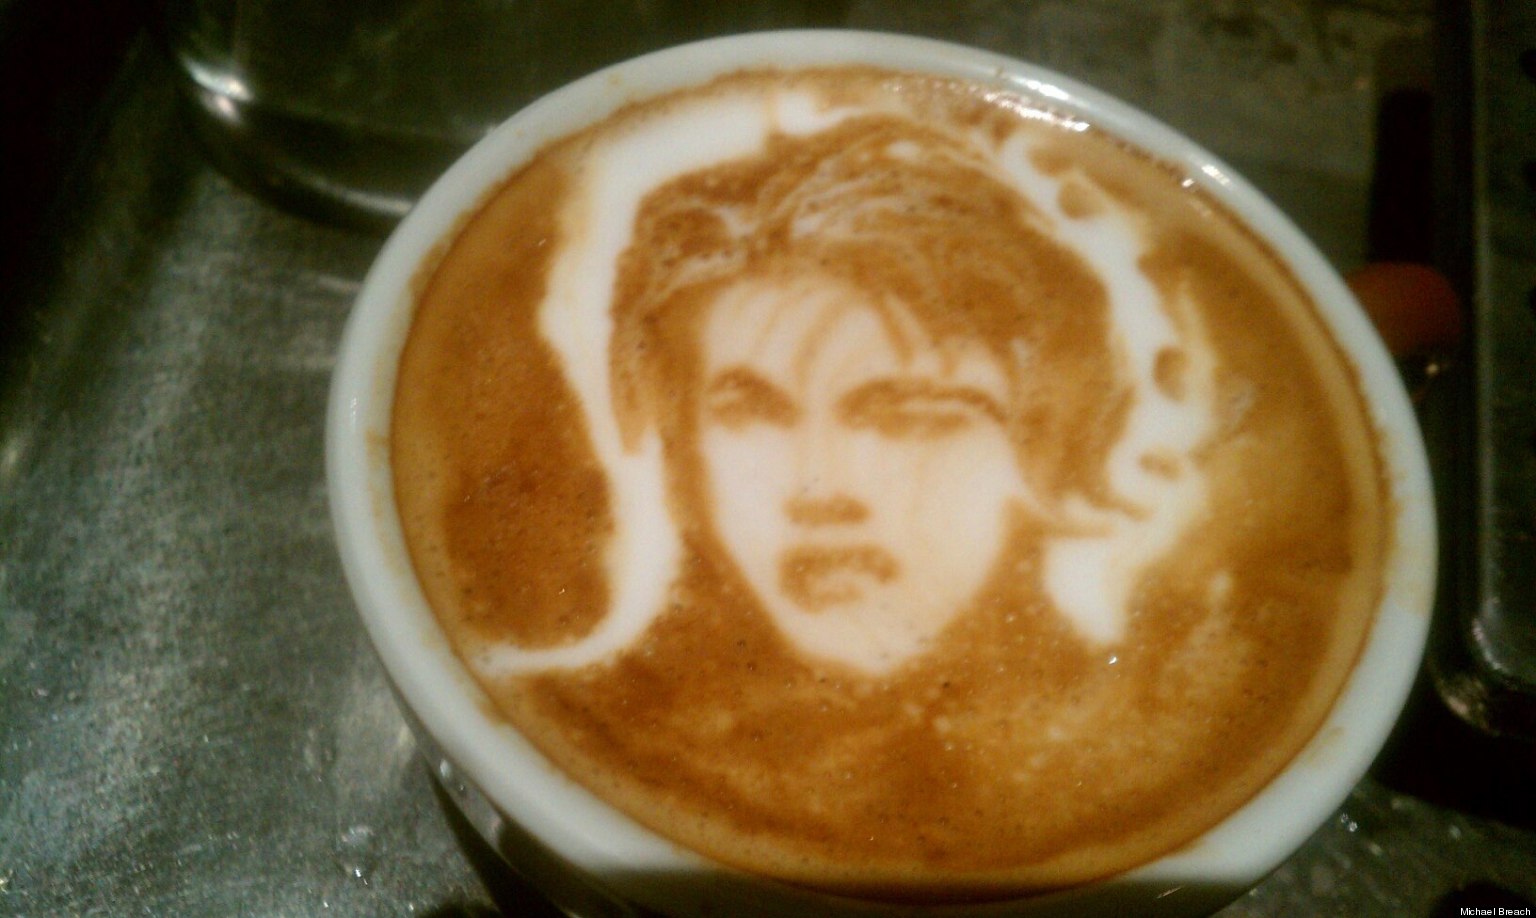 Coffee Art: Mike Breach's 'Baristart' Makes For Amazing Celebrity Latte ...